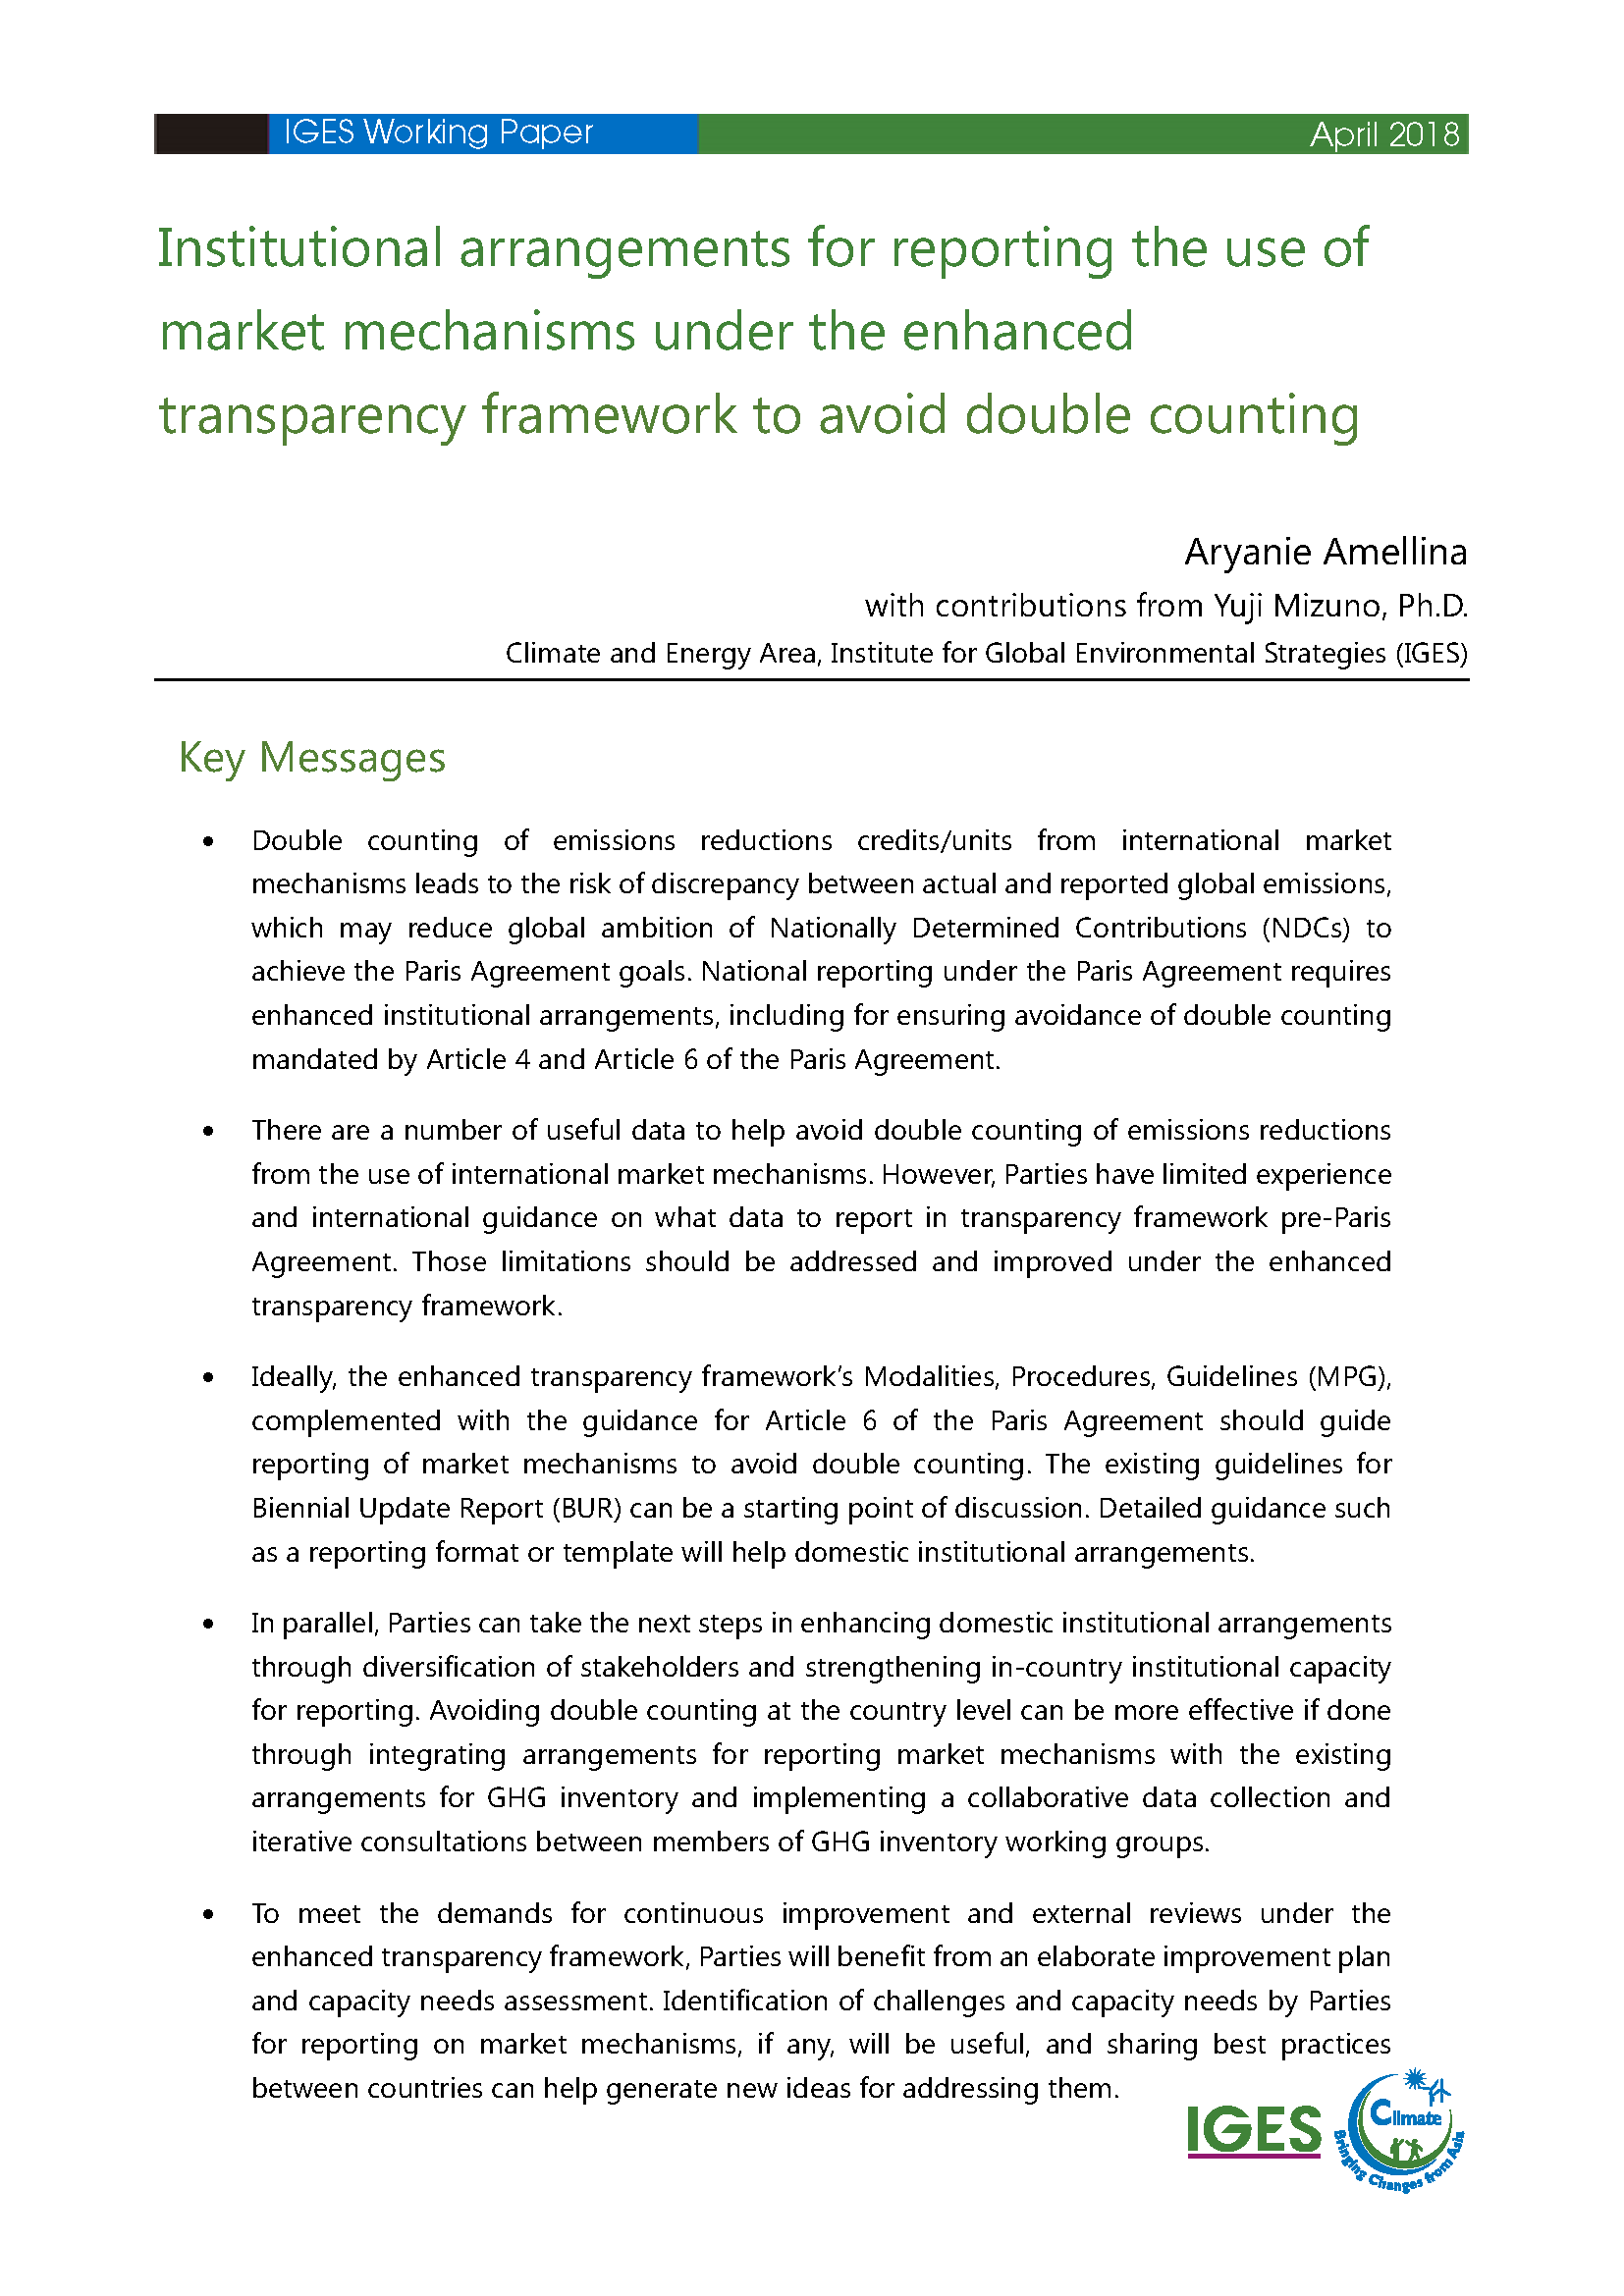 Institutional arrangements for reporting market mechanisms to avoid double counting